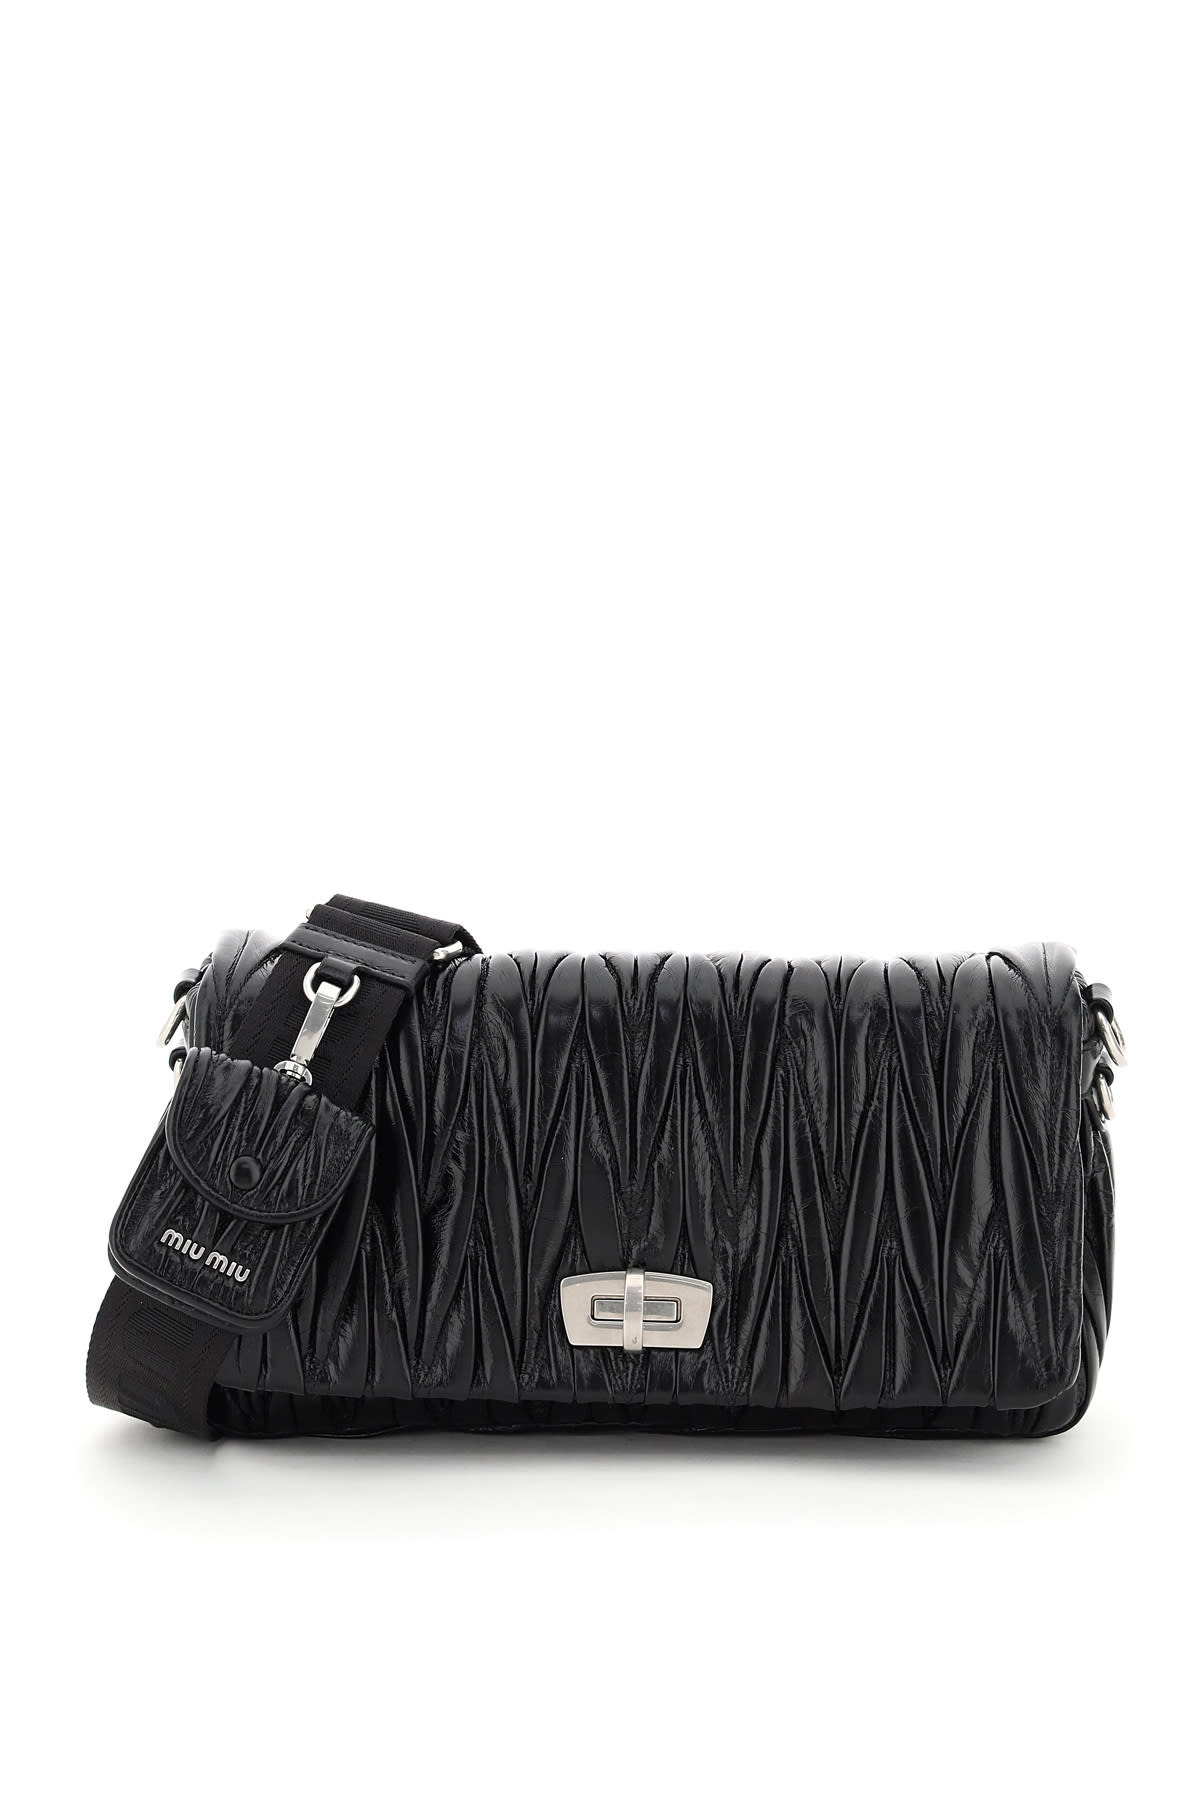 MIU MIU QUILTED SHOULDER BAG WITH POUCH,11880836